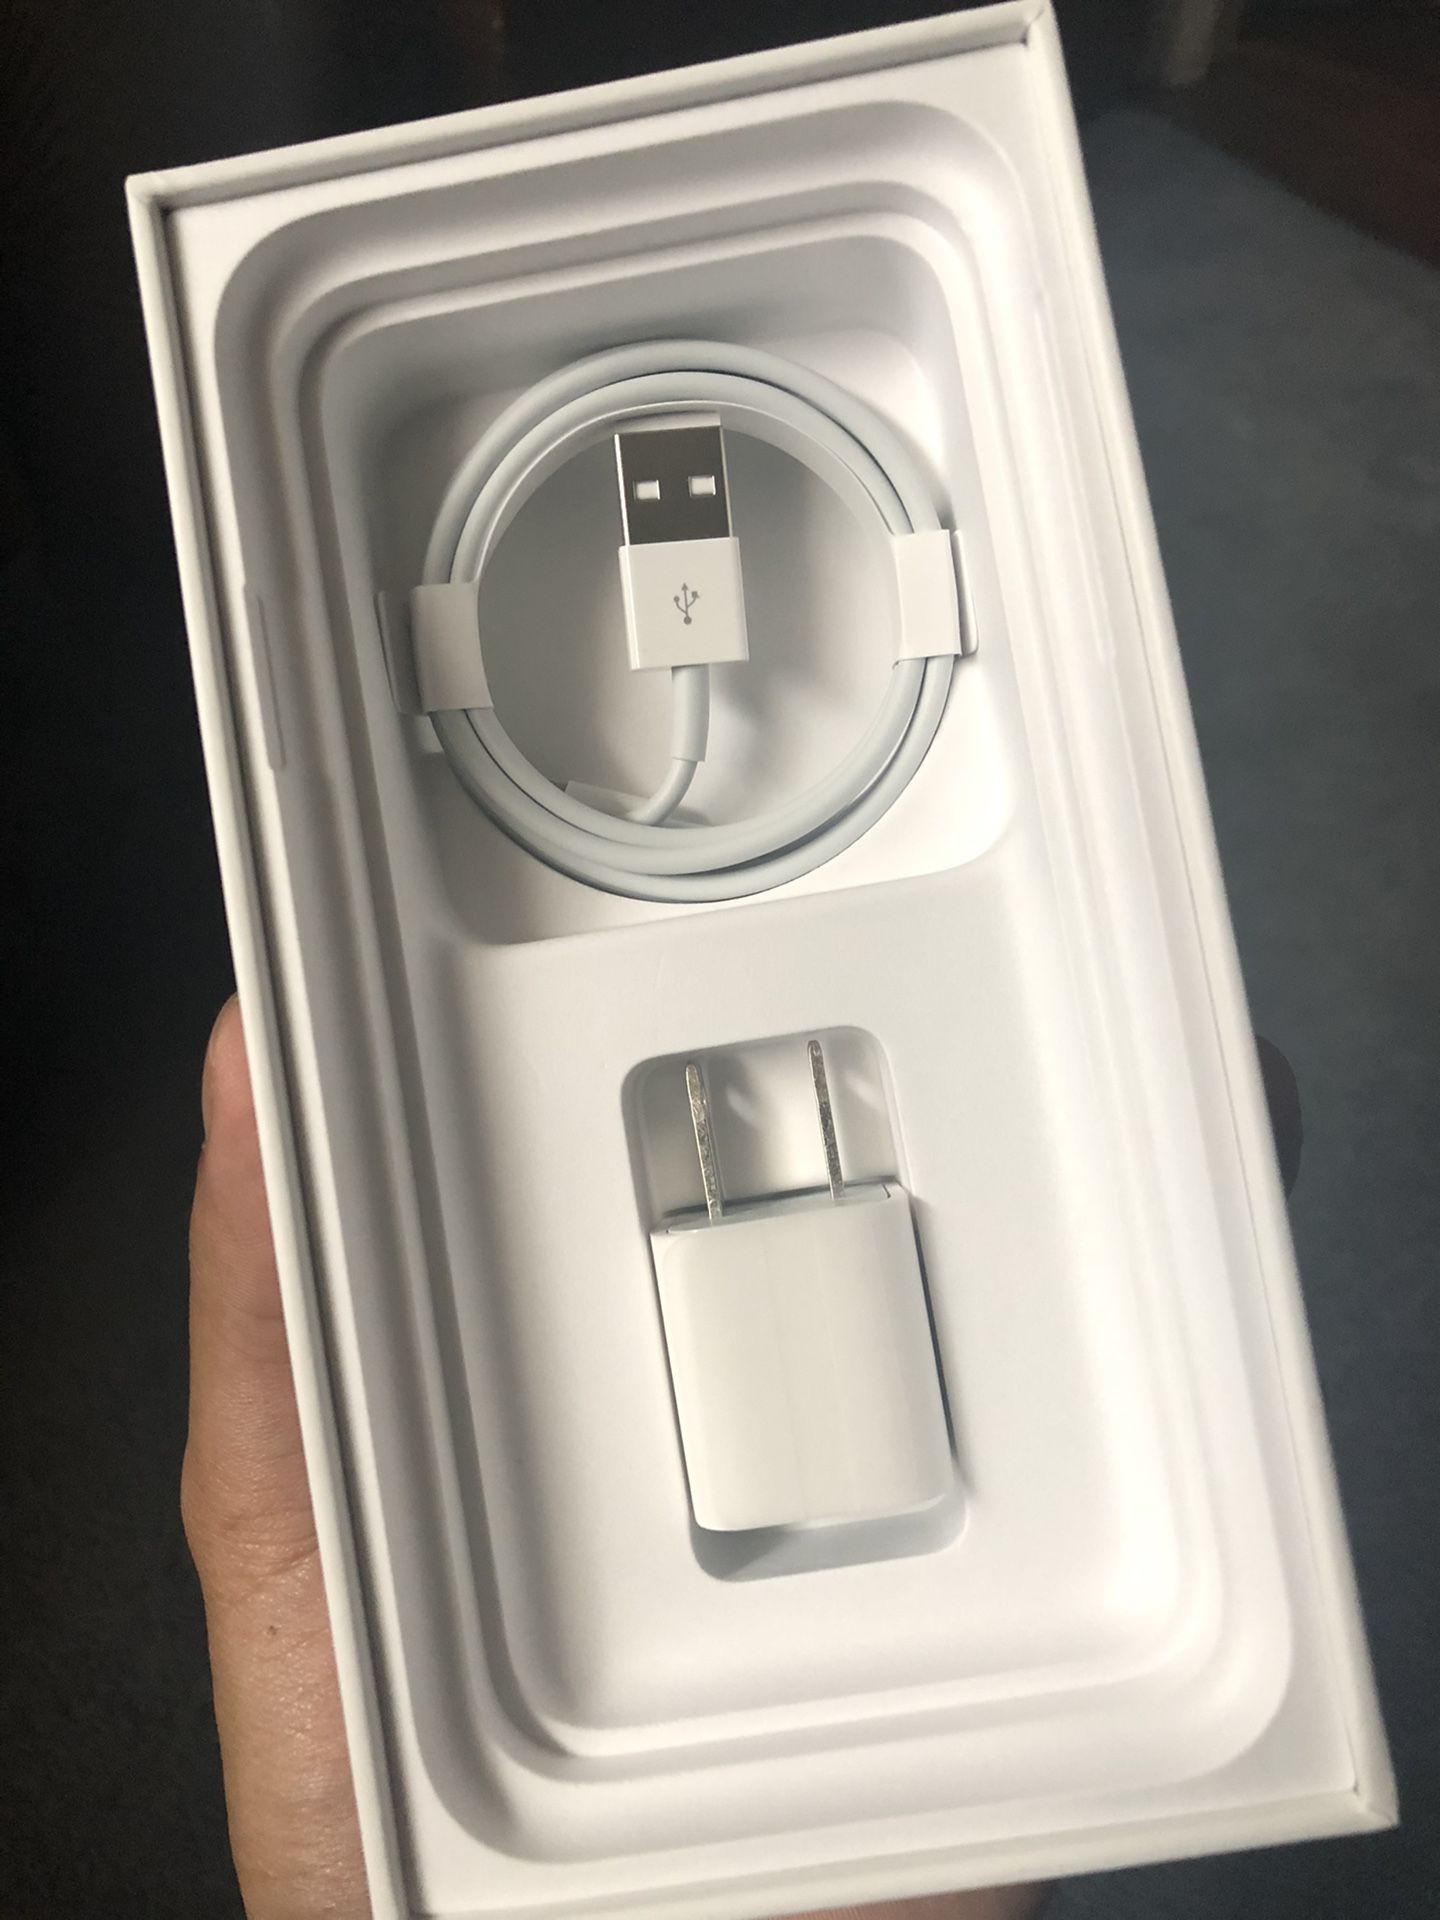 APPLE Charger(usb lighting cable and adapter)